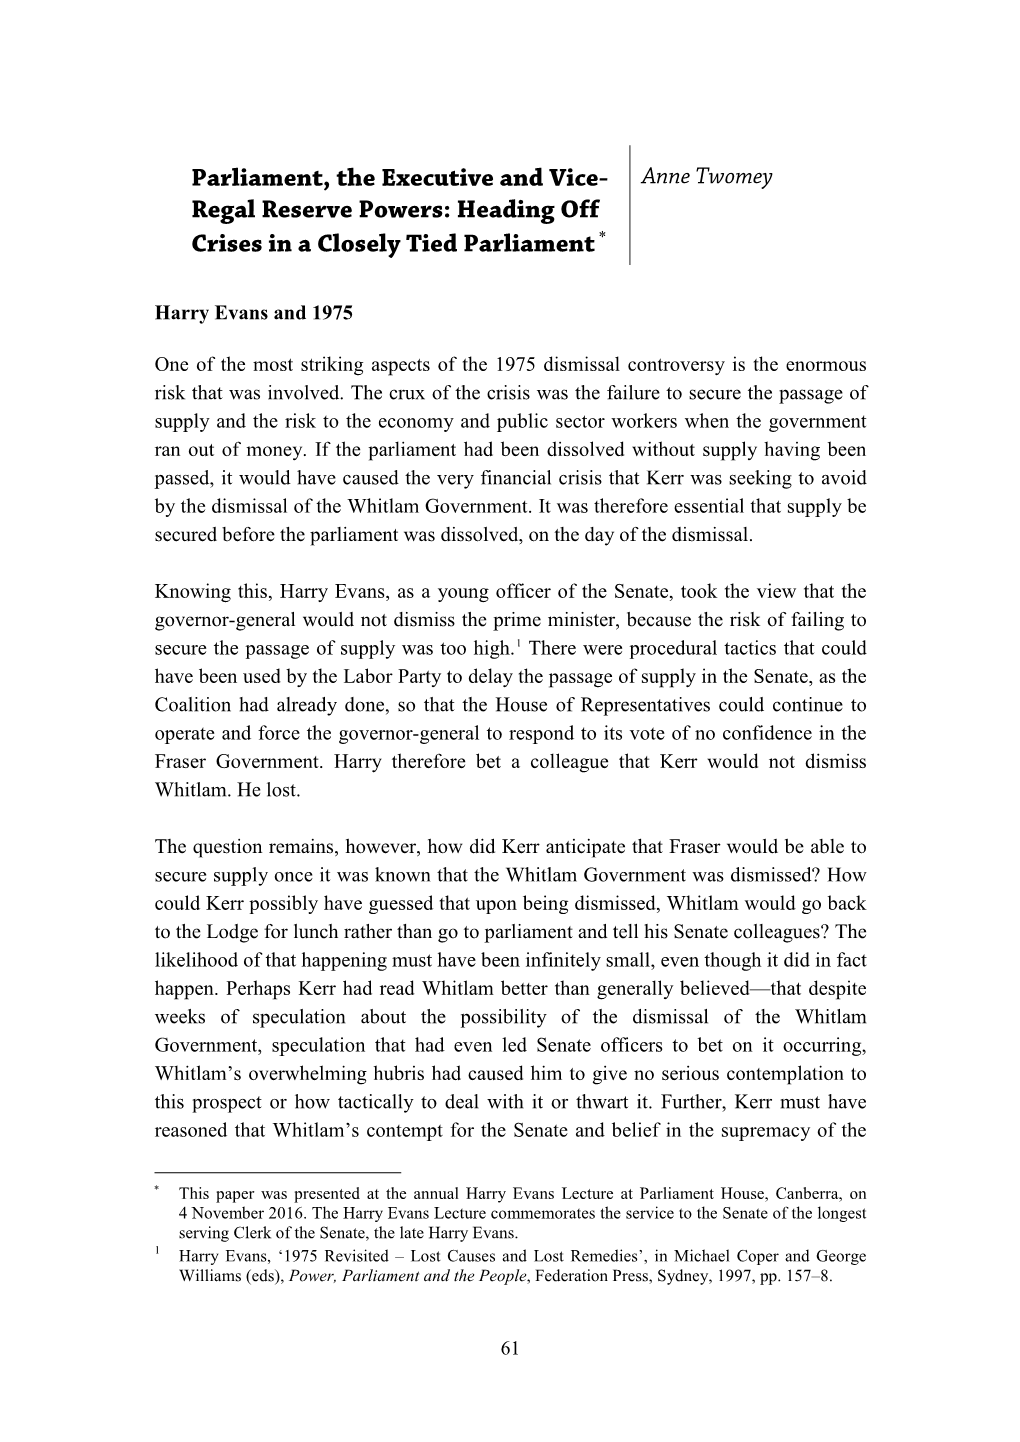 Papers on Parliament No. 67